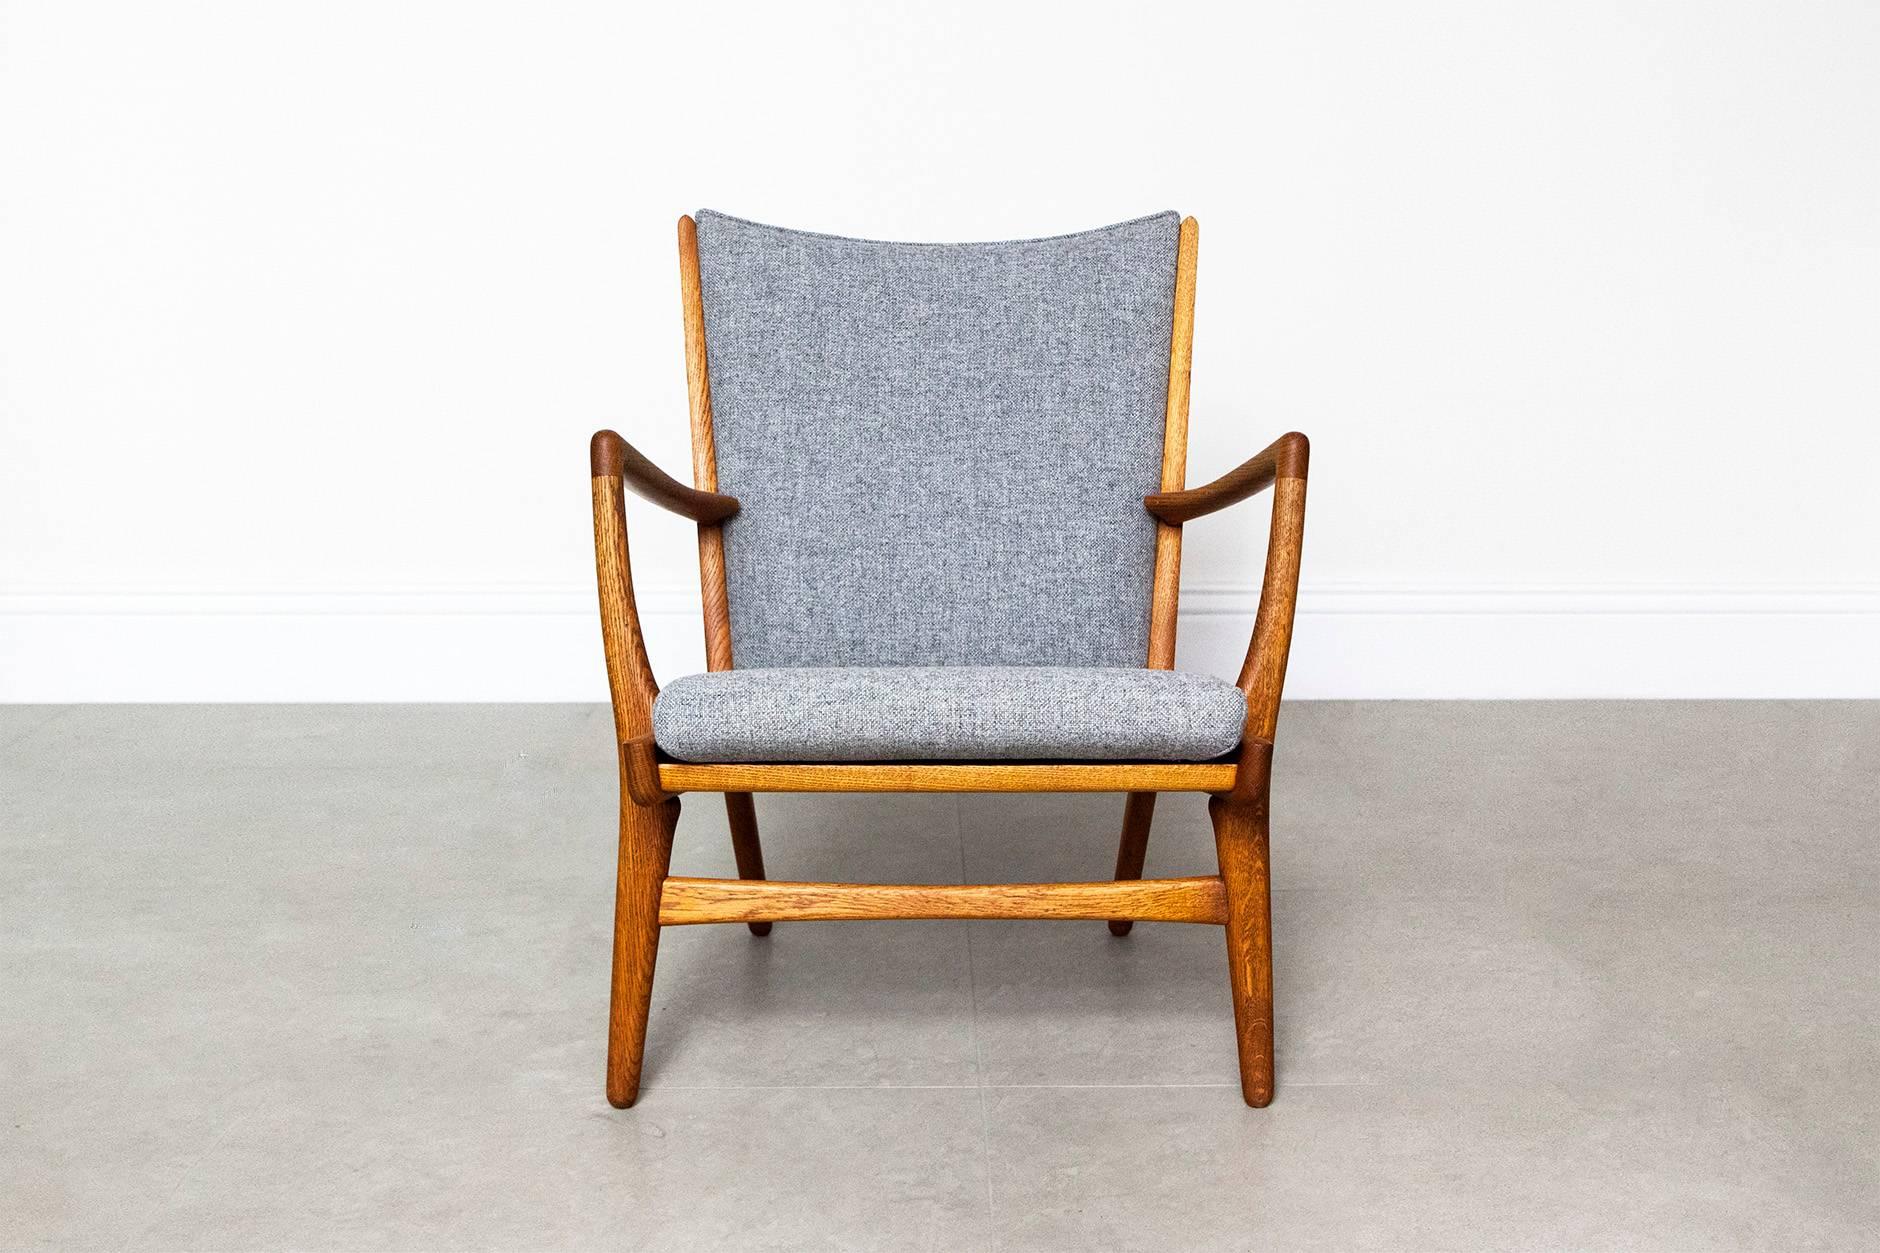 Oak armchair from Danish master Hans Wegner, designed for cabinet maker AP Stolen in 1952. This model was part of the same series as Wegner's iconic Papa Bear chair and was made in small quantities. The seat and back have been reupholstered in